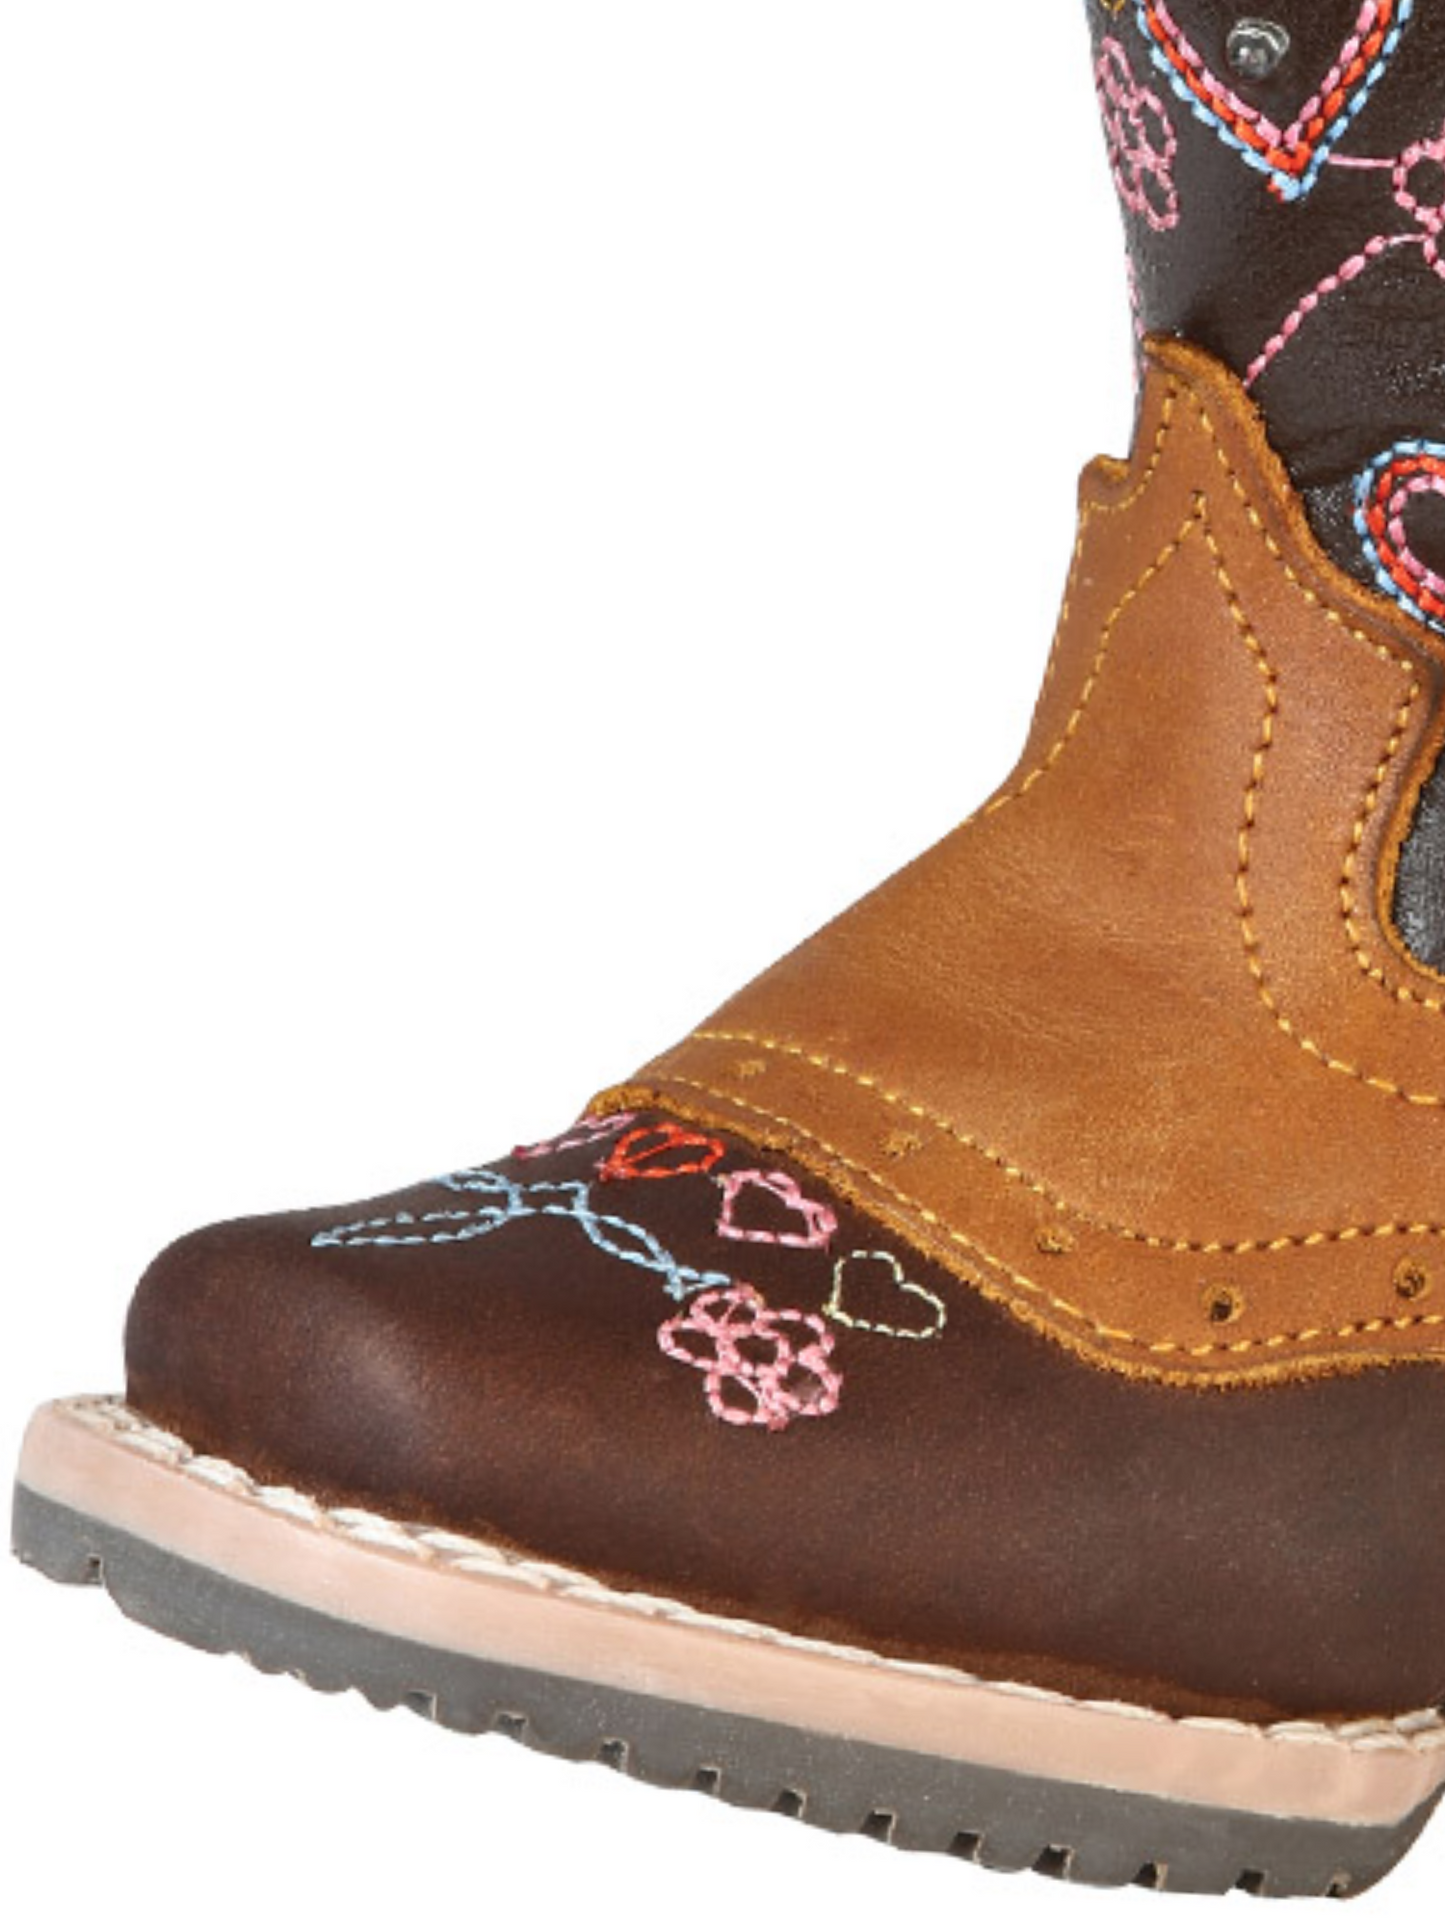 Kids - Rodeo Cowboy Boots with Genuine Leather Mask for Babies 'Jar Boots' - ID: 126576